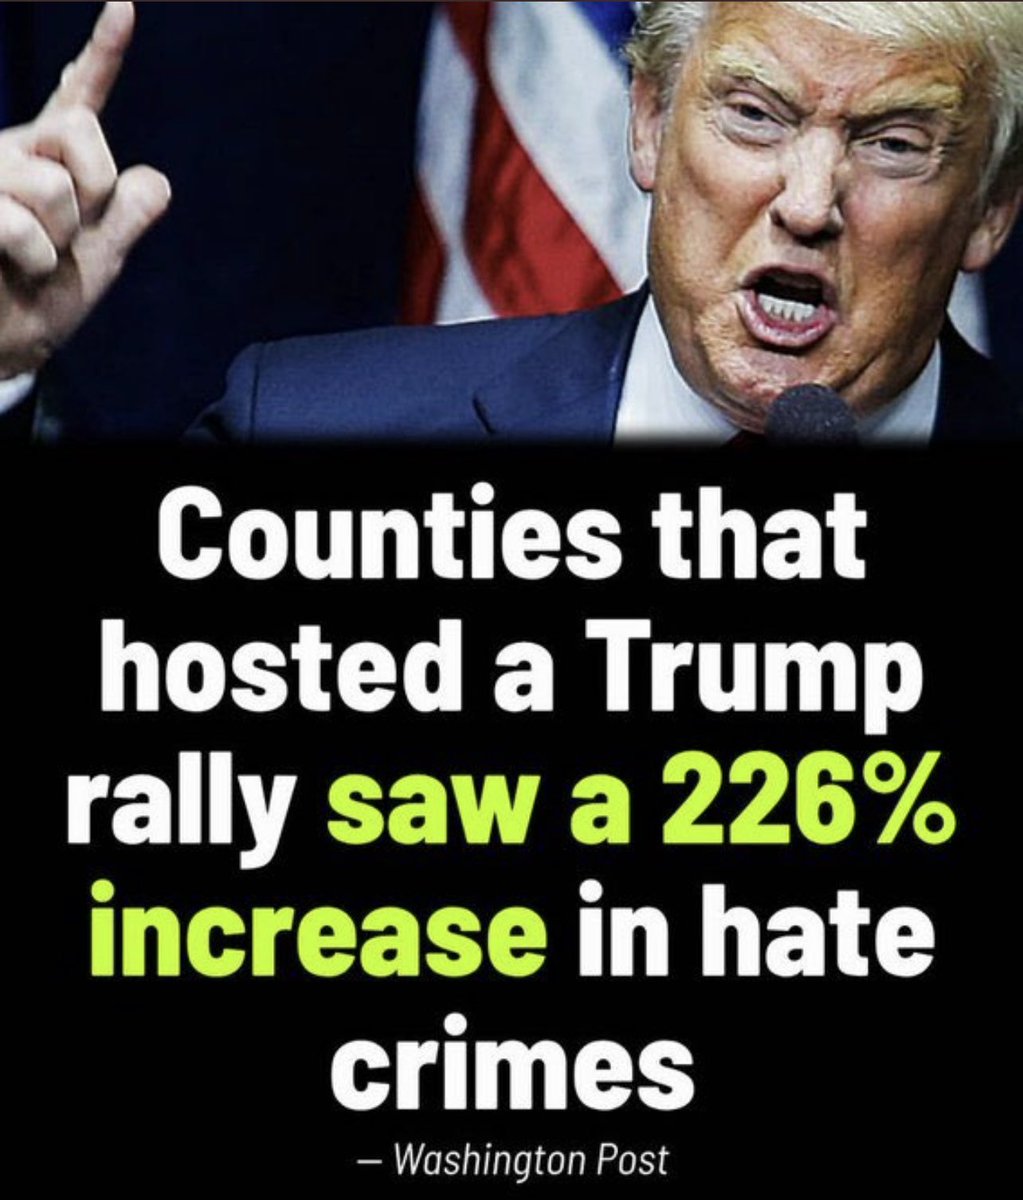 Does that really surprise anyone. This orange turd spews hatred onto his poorly educated minions who then feel a sense of duty to be their worst selves.